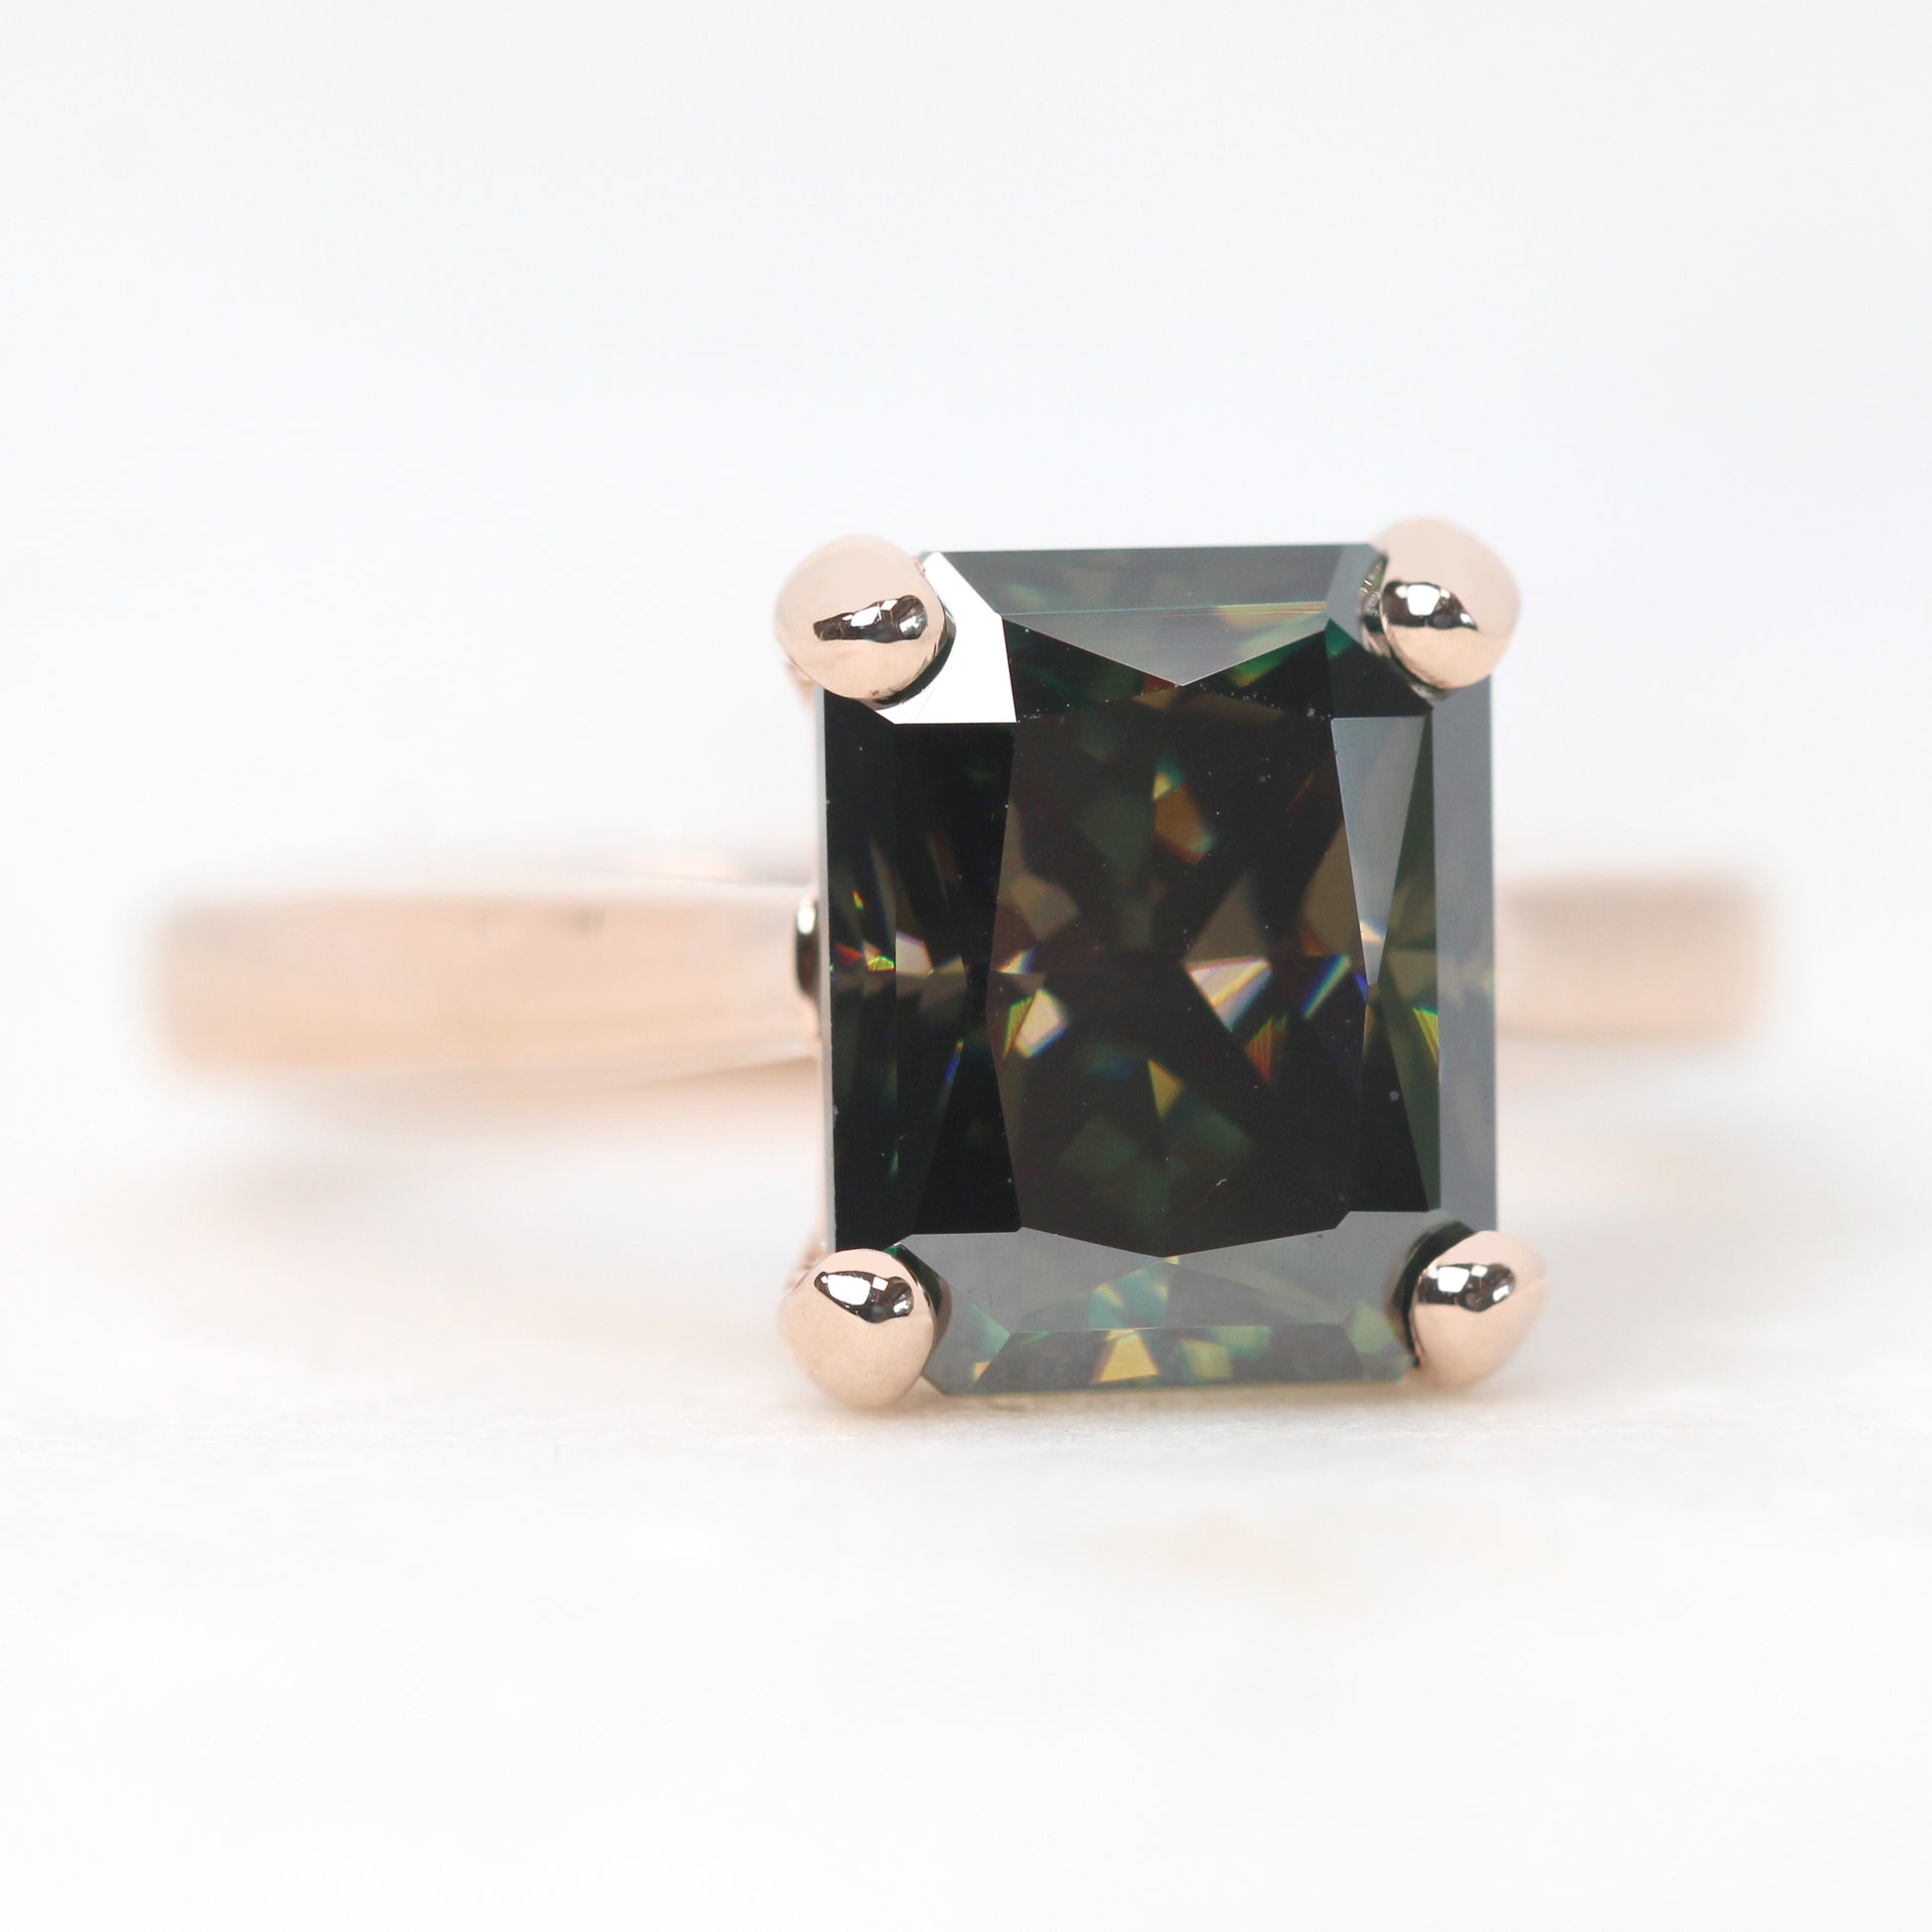 Lexi Ring with a 4.00 Carat Emerald Cut Black and Teal Moissanite in 14k Rose Gold - Ready to Size and Ship - Midwinter Co. Alternative Bridal Rings and Modern Fine Jewelry